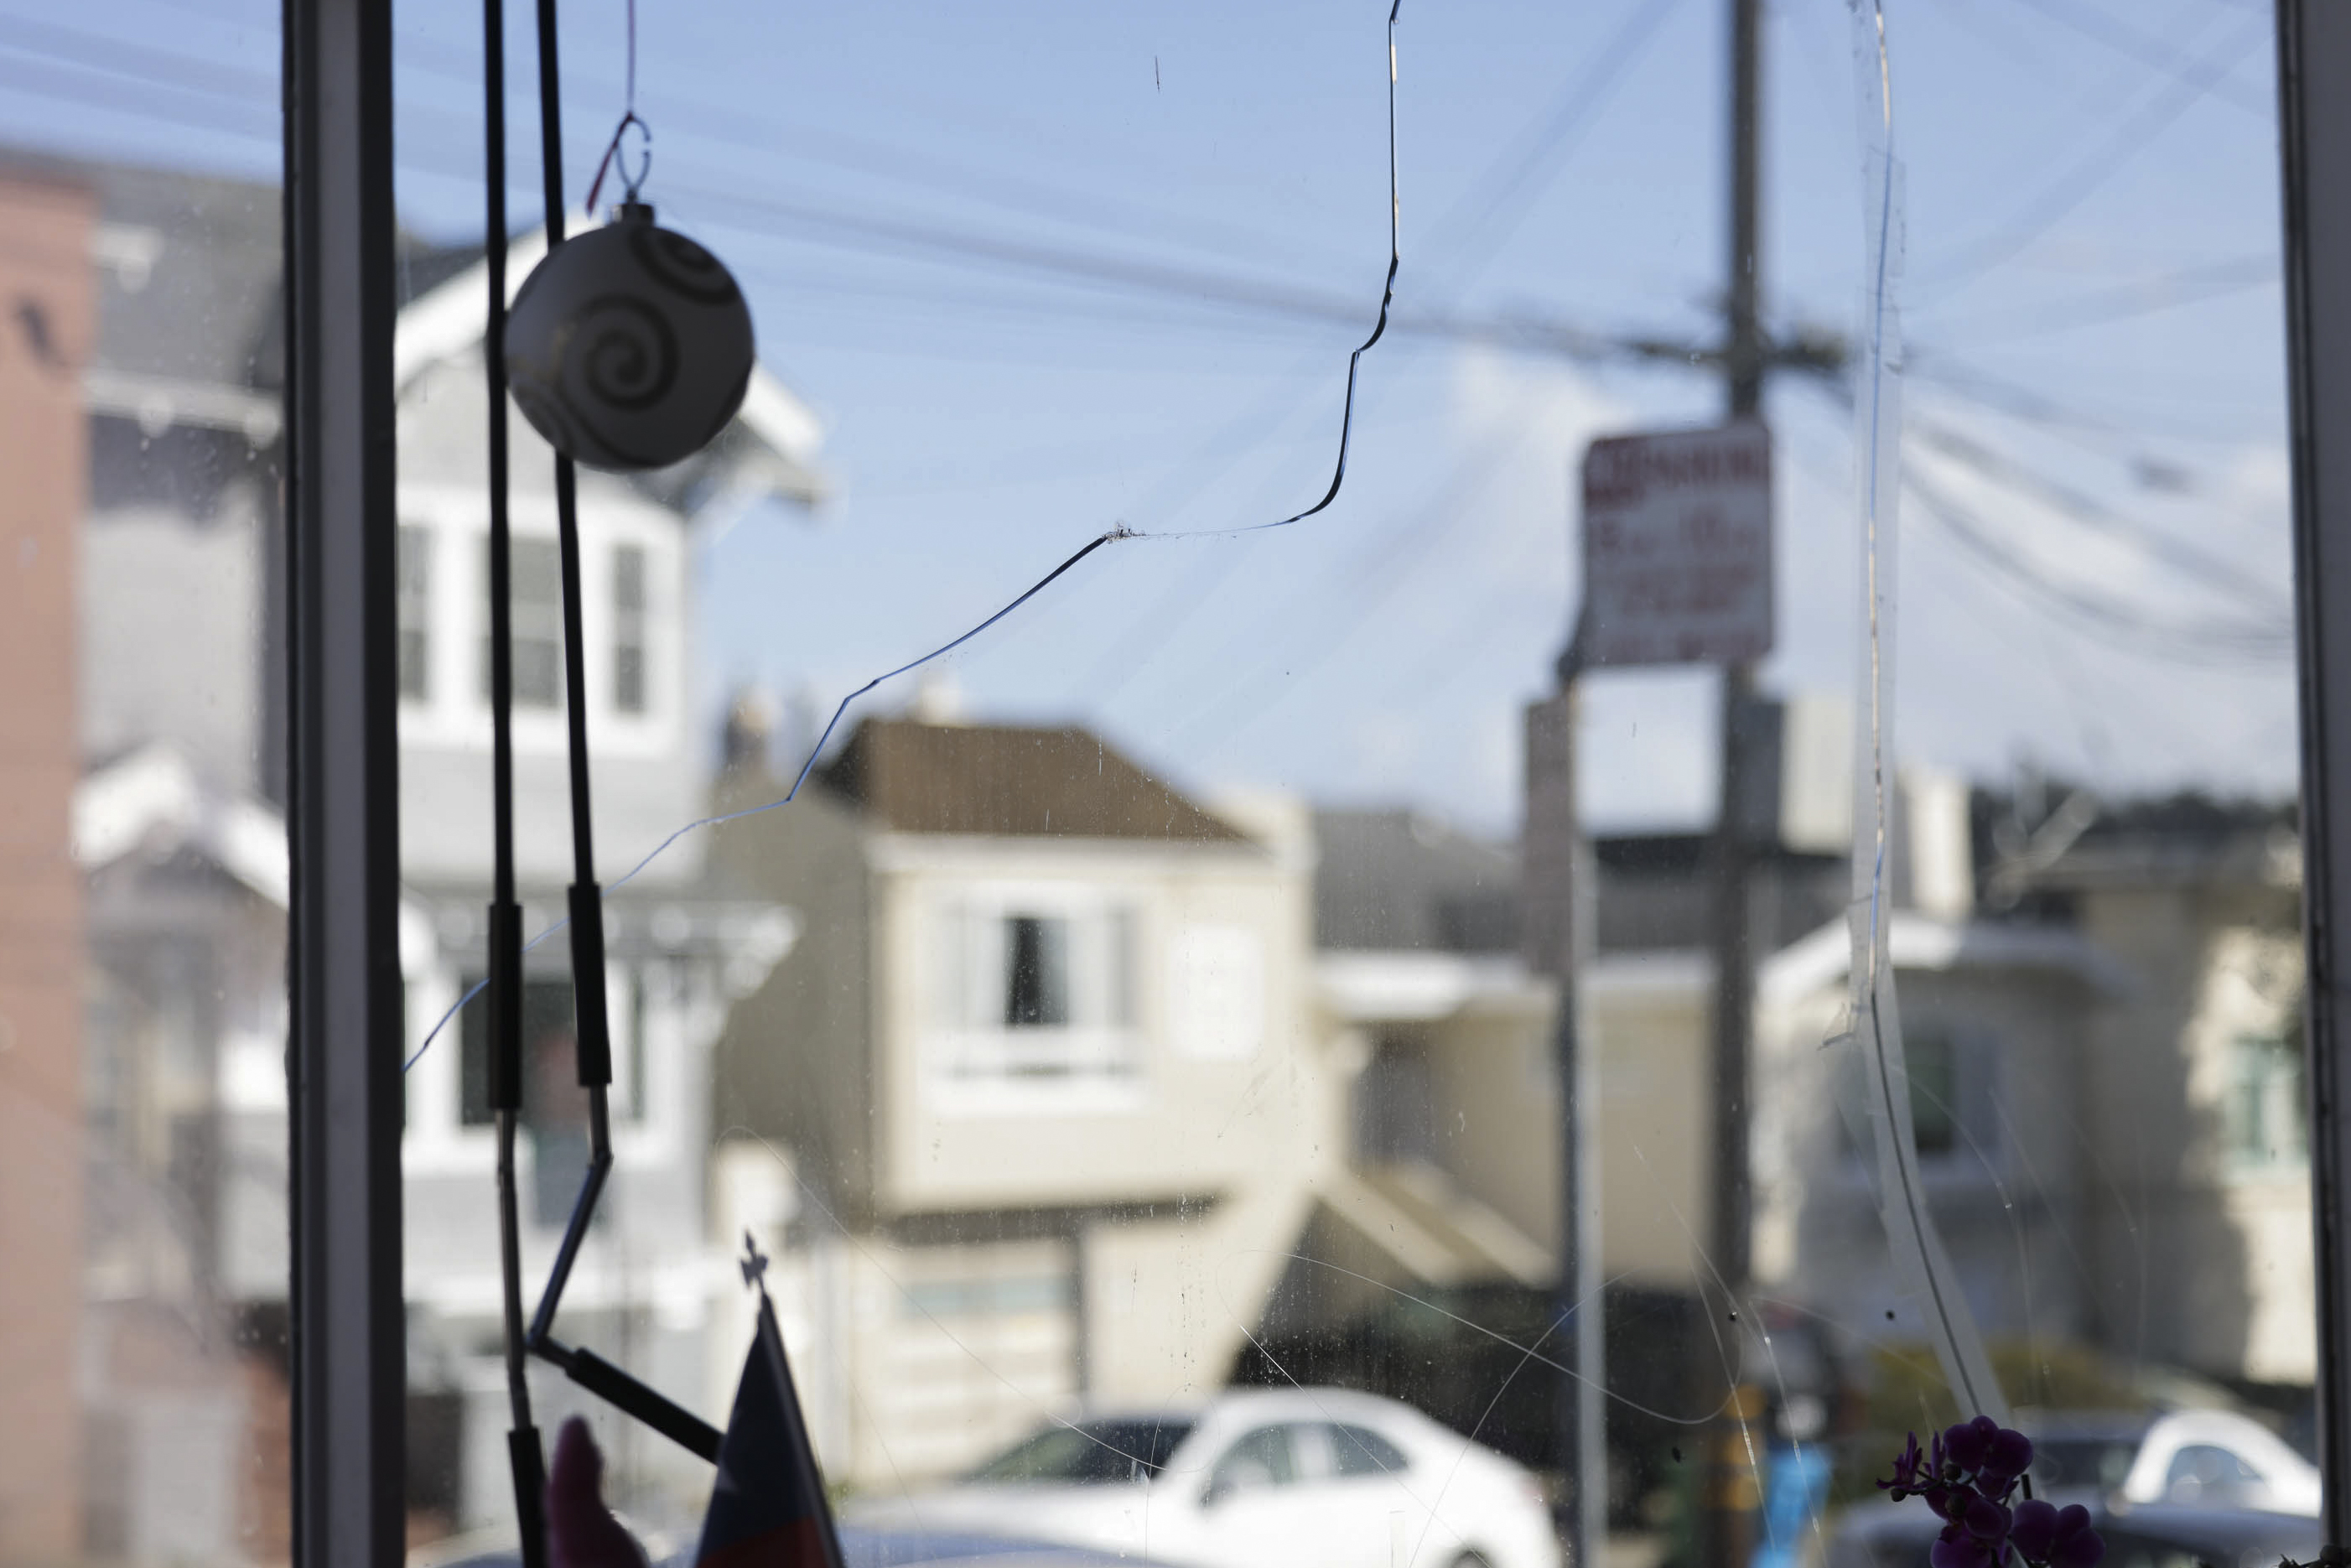 The image shows a cracked window with blurry street view and hanging decorations.